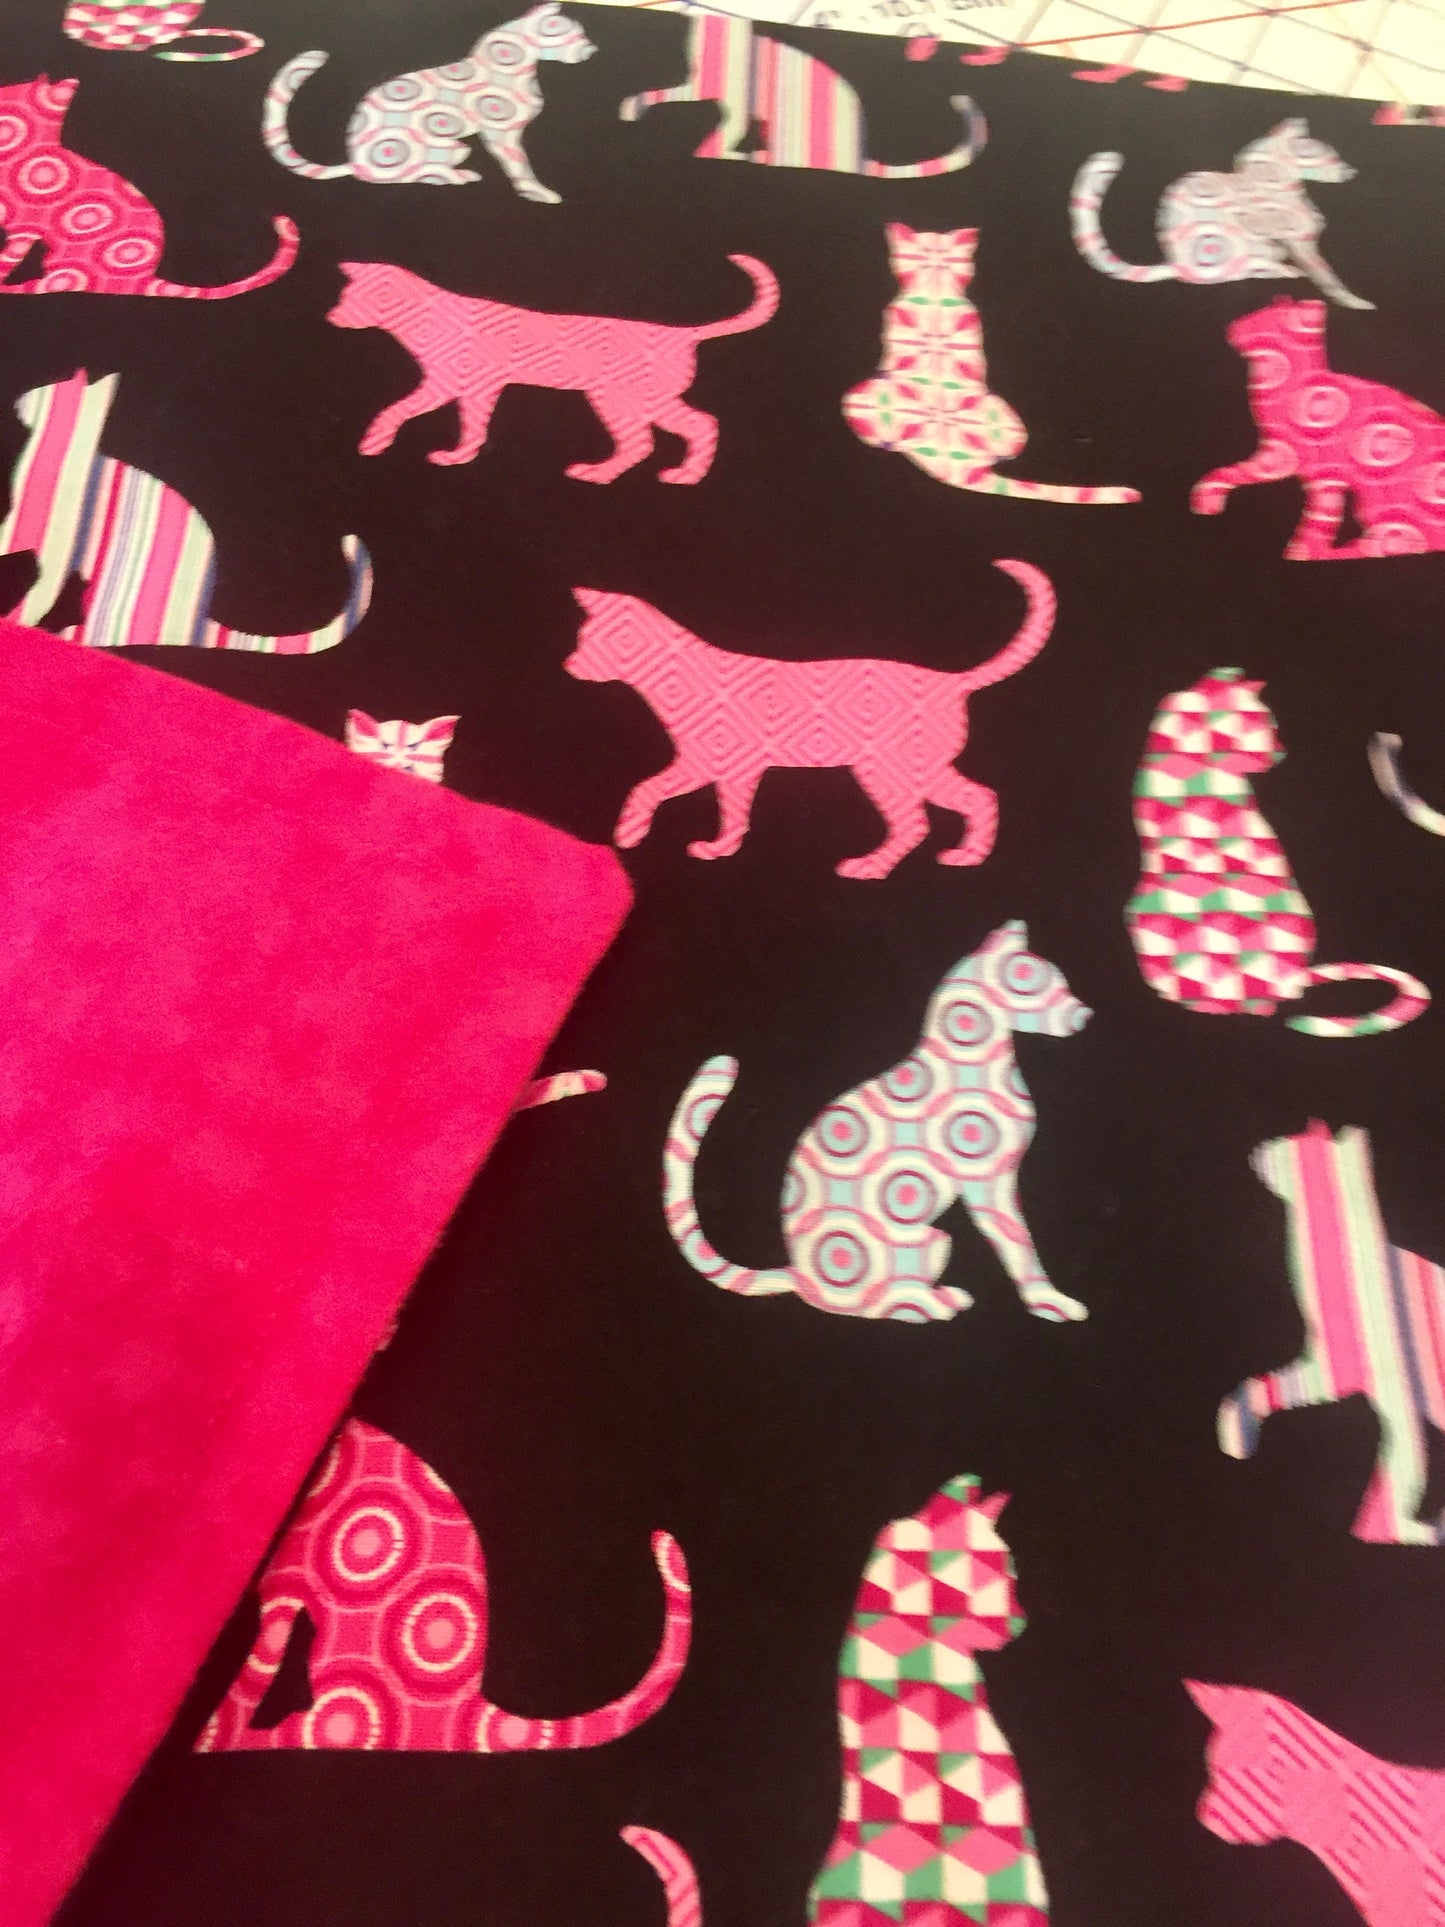 A cat lover’s must have blanket and gift!